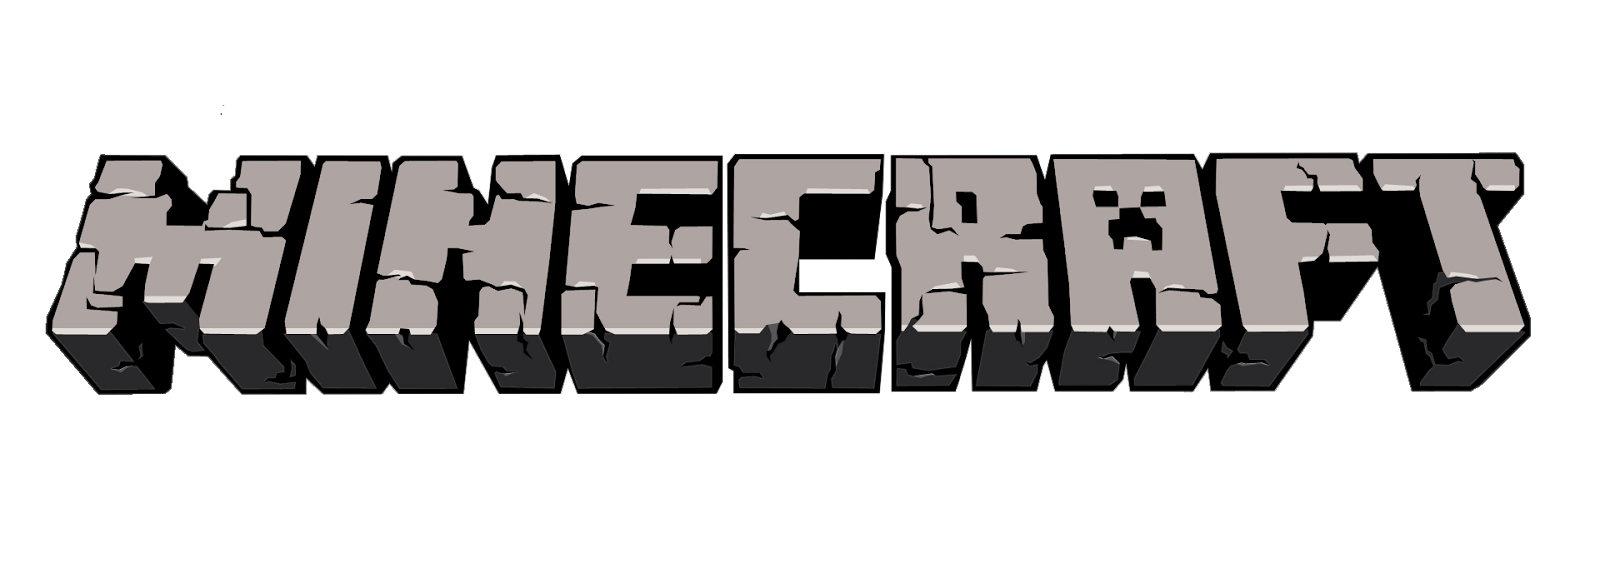 Minecraft clipart page 1 3